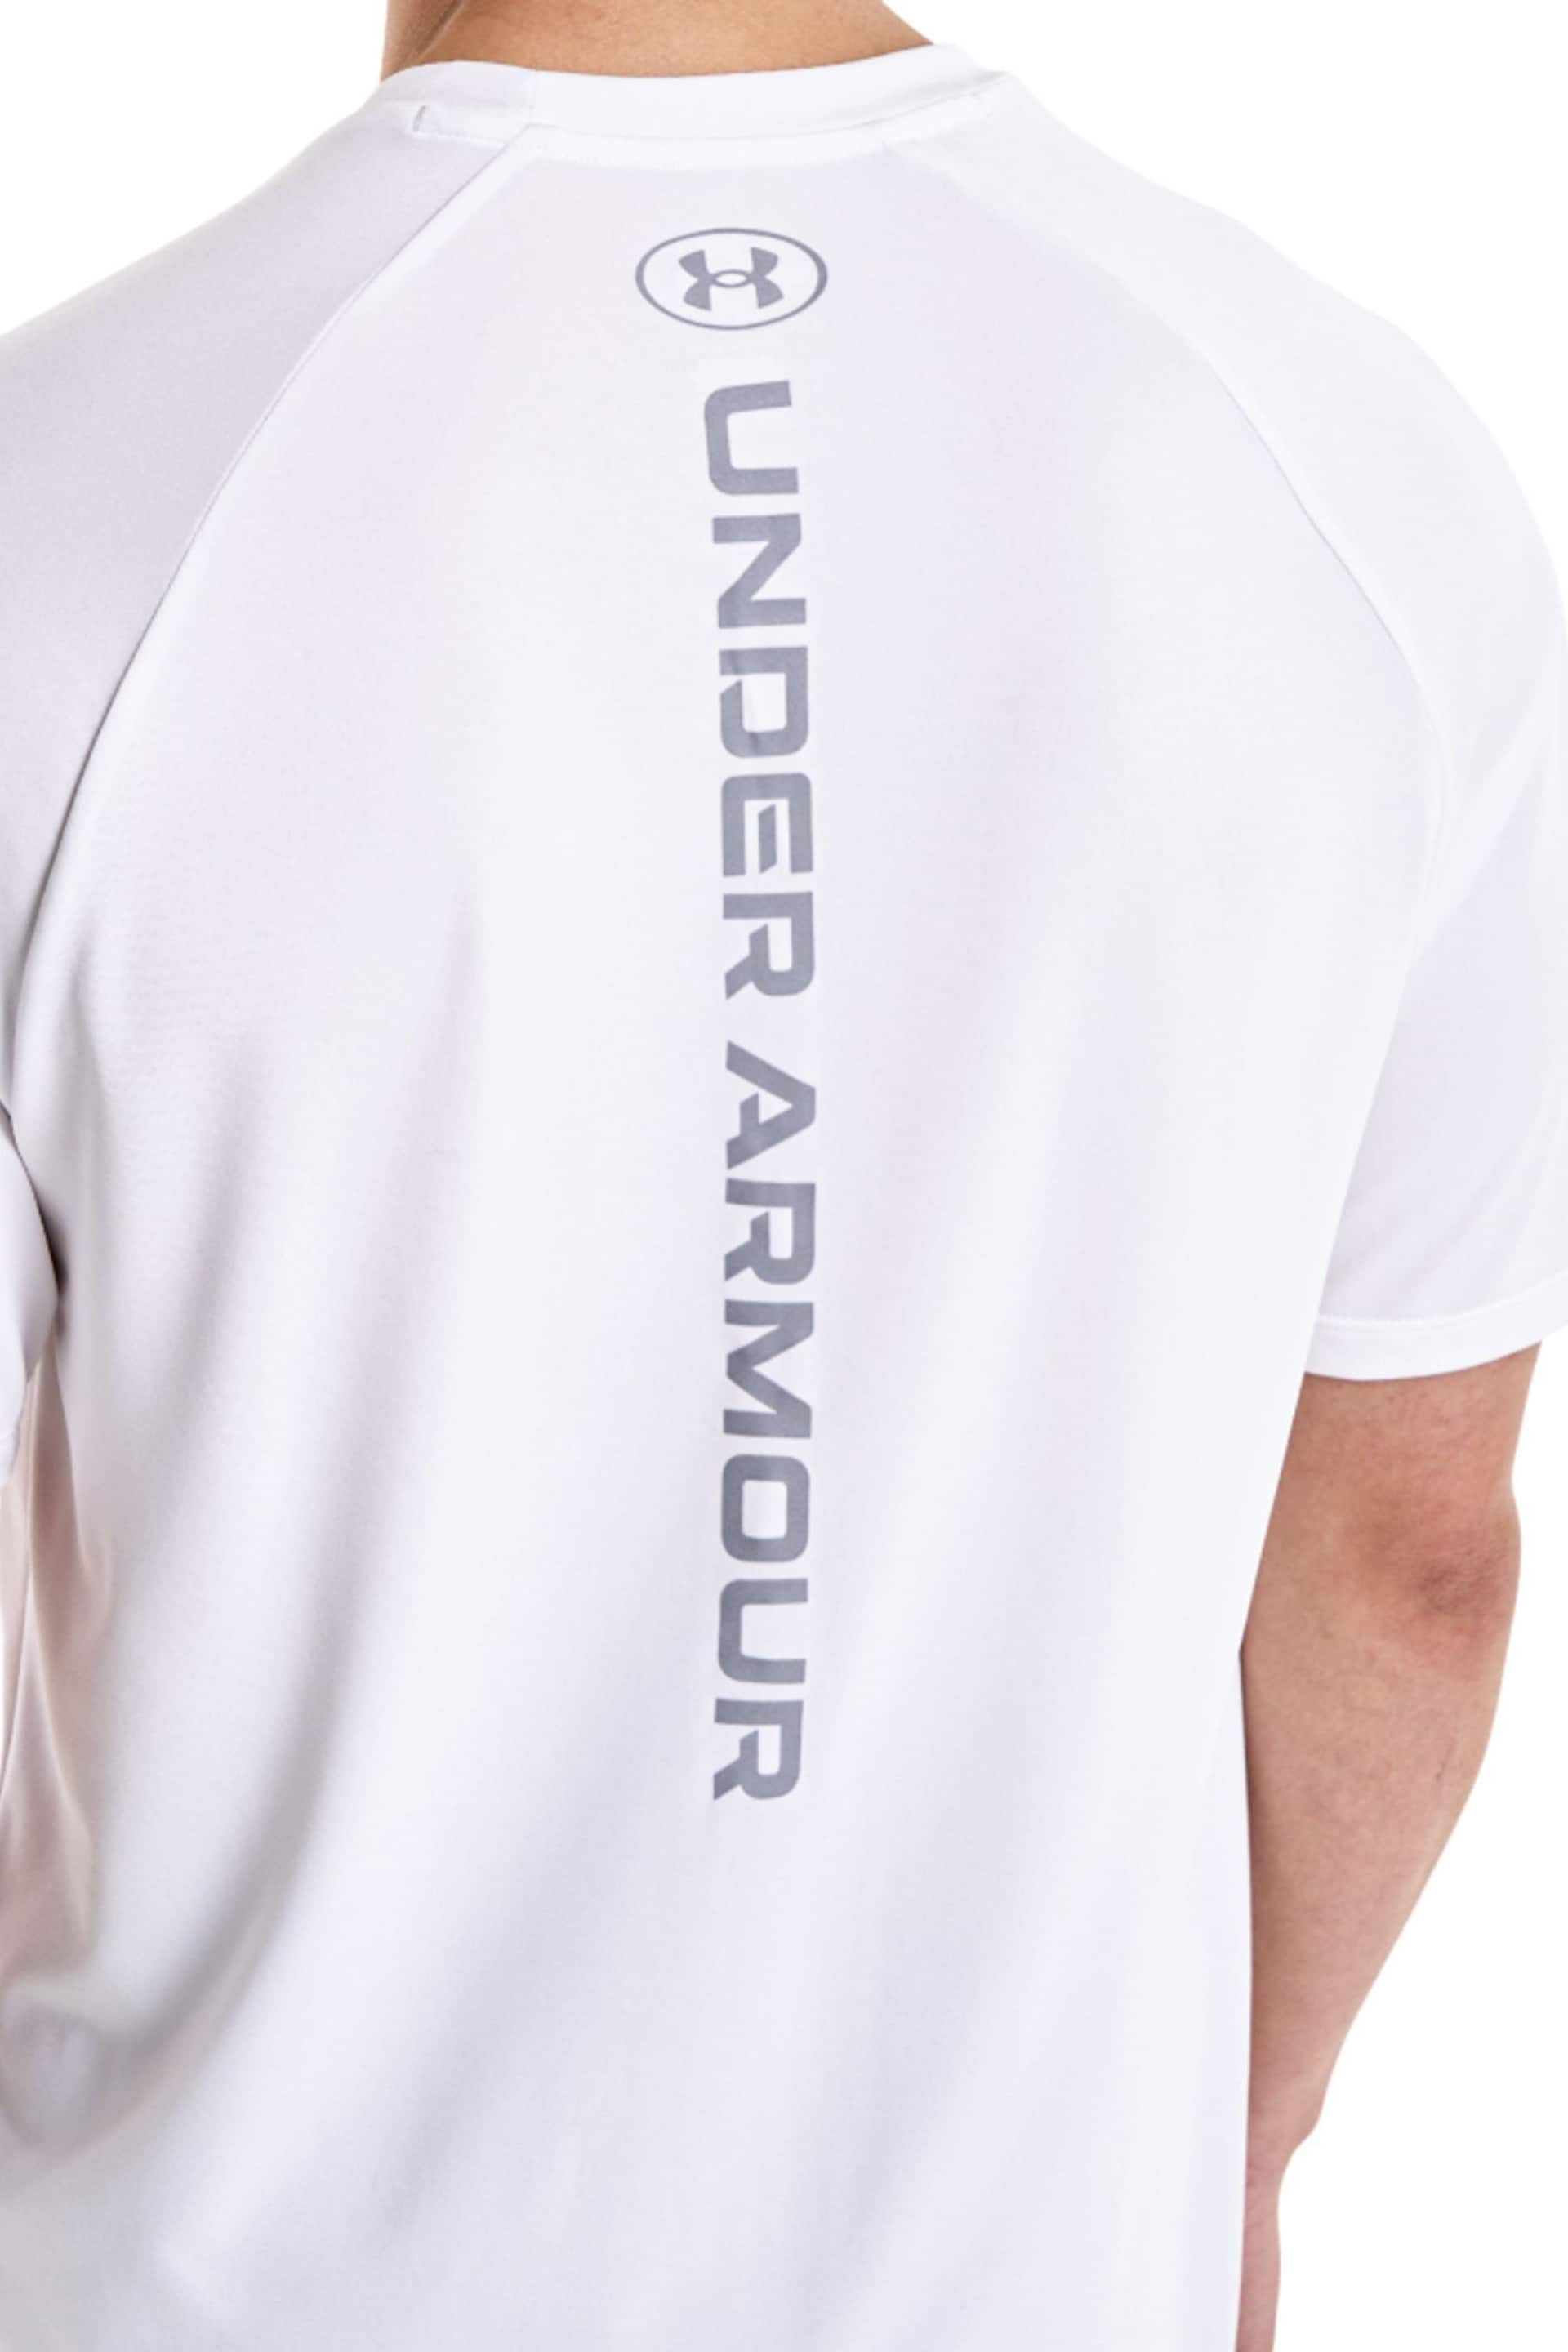 Under Armour Tech Reflective Short Sleeve T-Shirt - Image 5 of 7